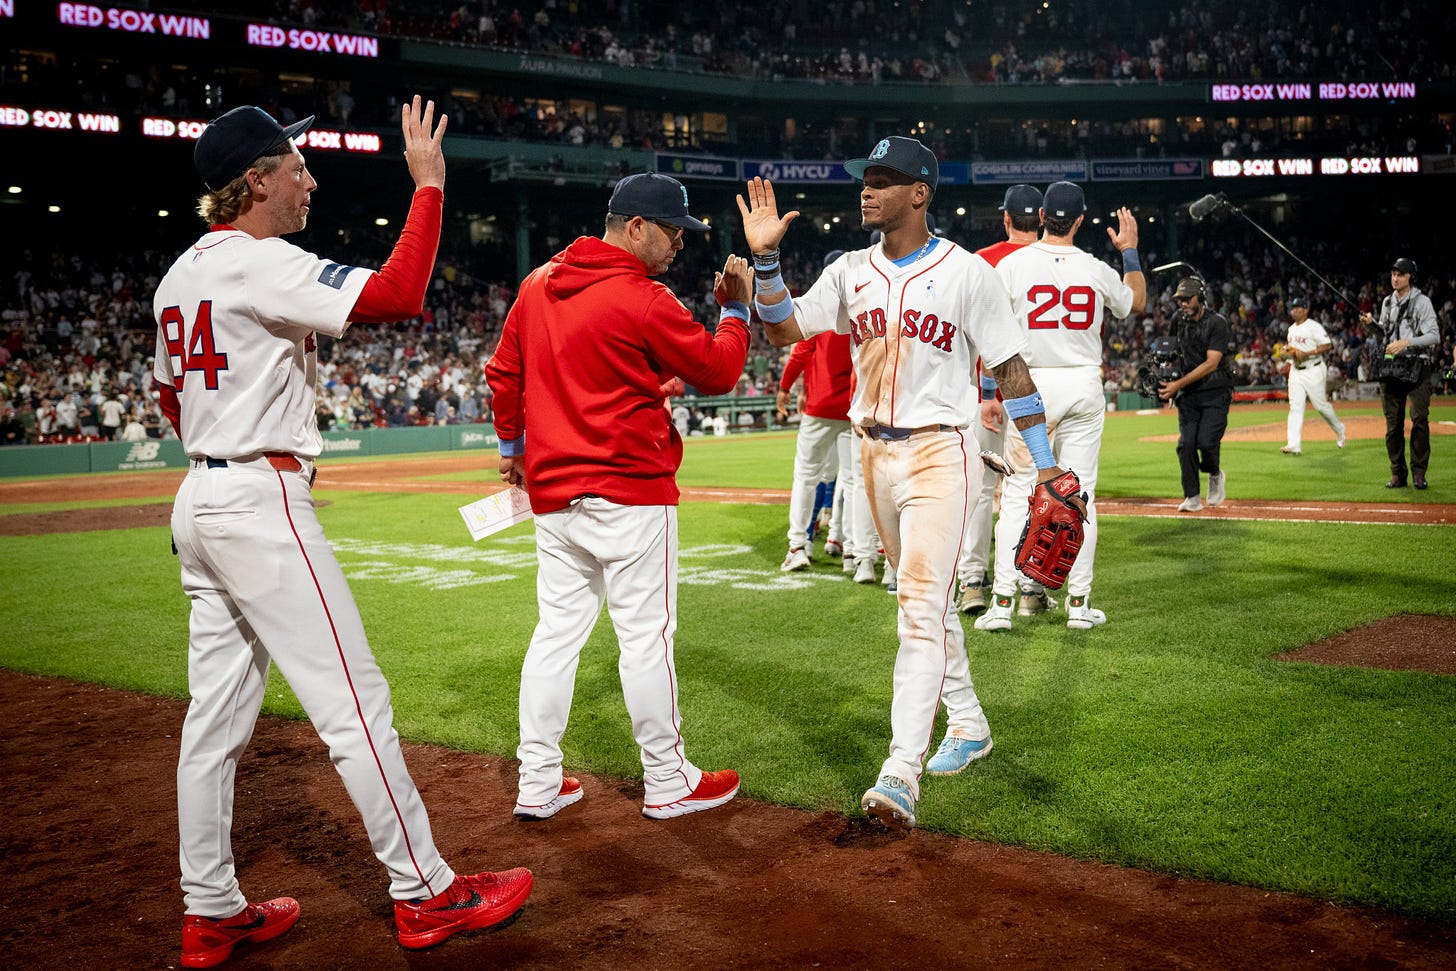 Ceddanne Rafaela walks along the high-five line following the win at Fenway Park. He high-fives Ramon Vazquez and Kyle Hudson. 